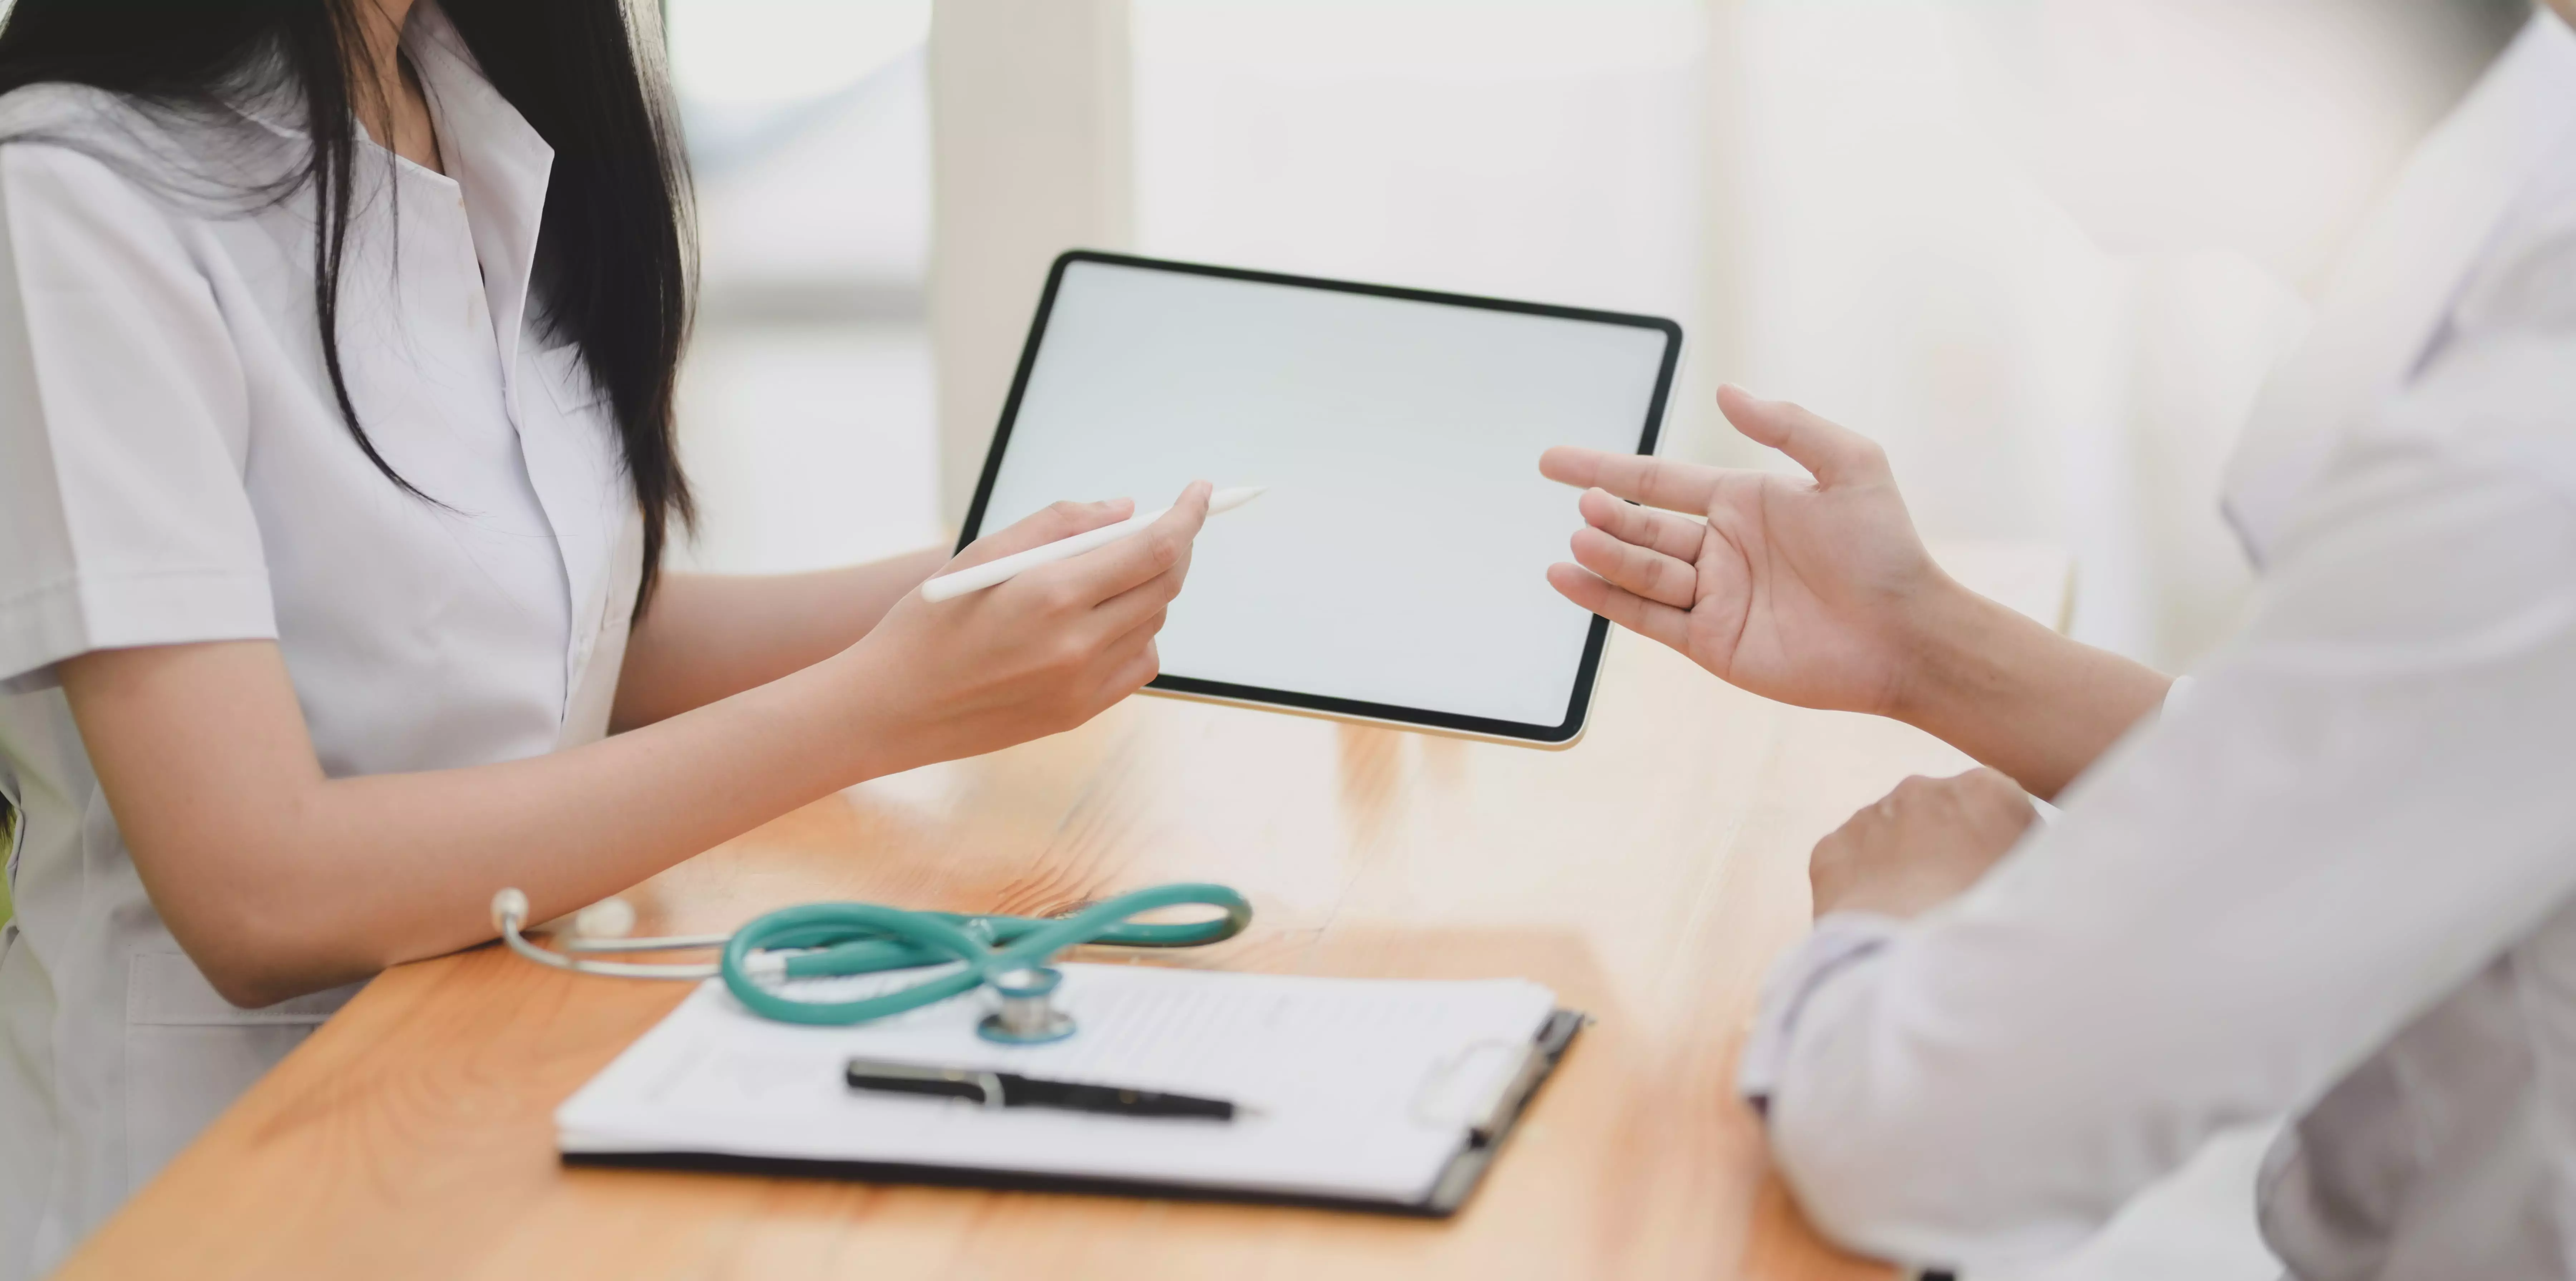 Female doctor with stethoscope explaining something on a tablet to a patient